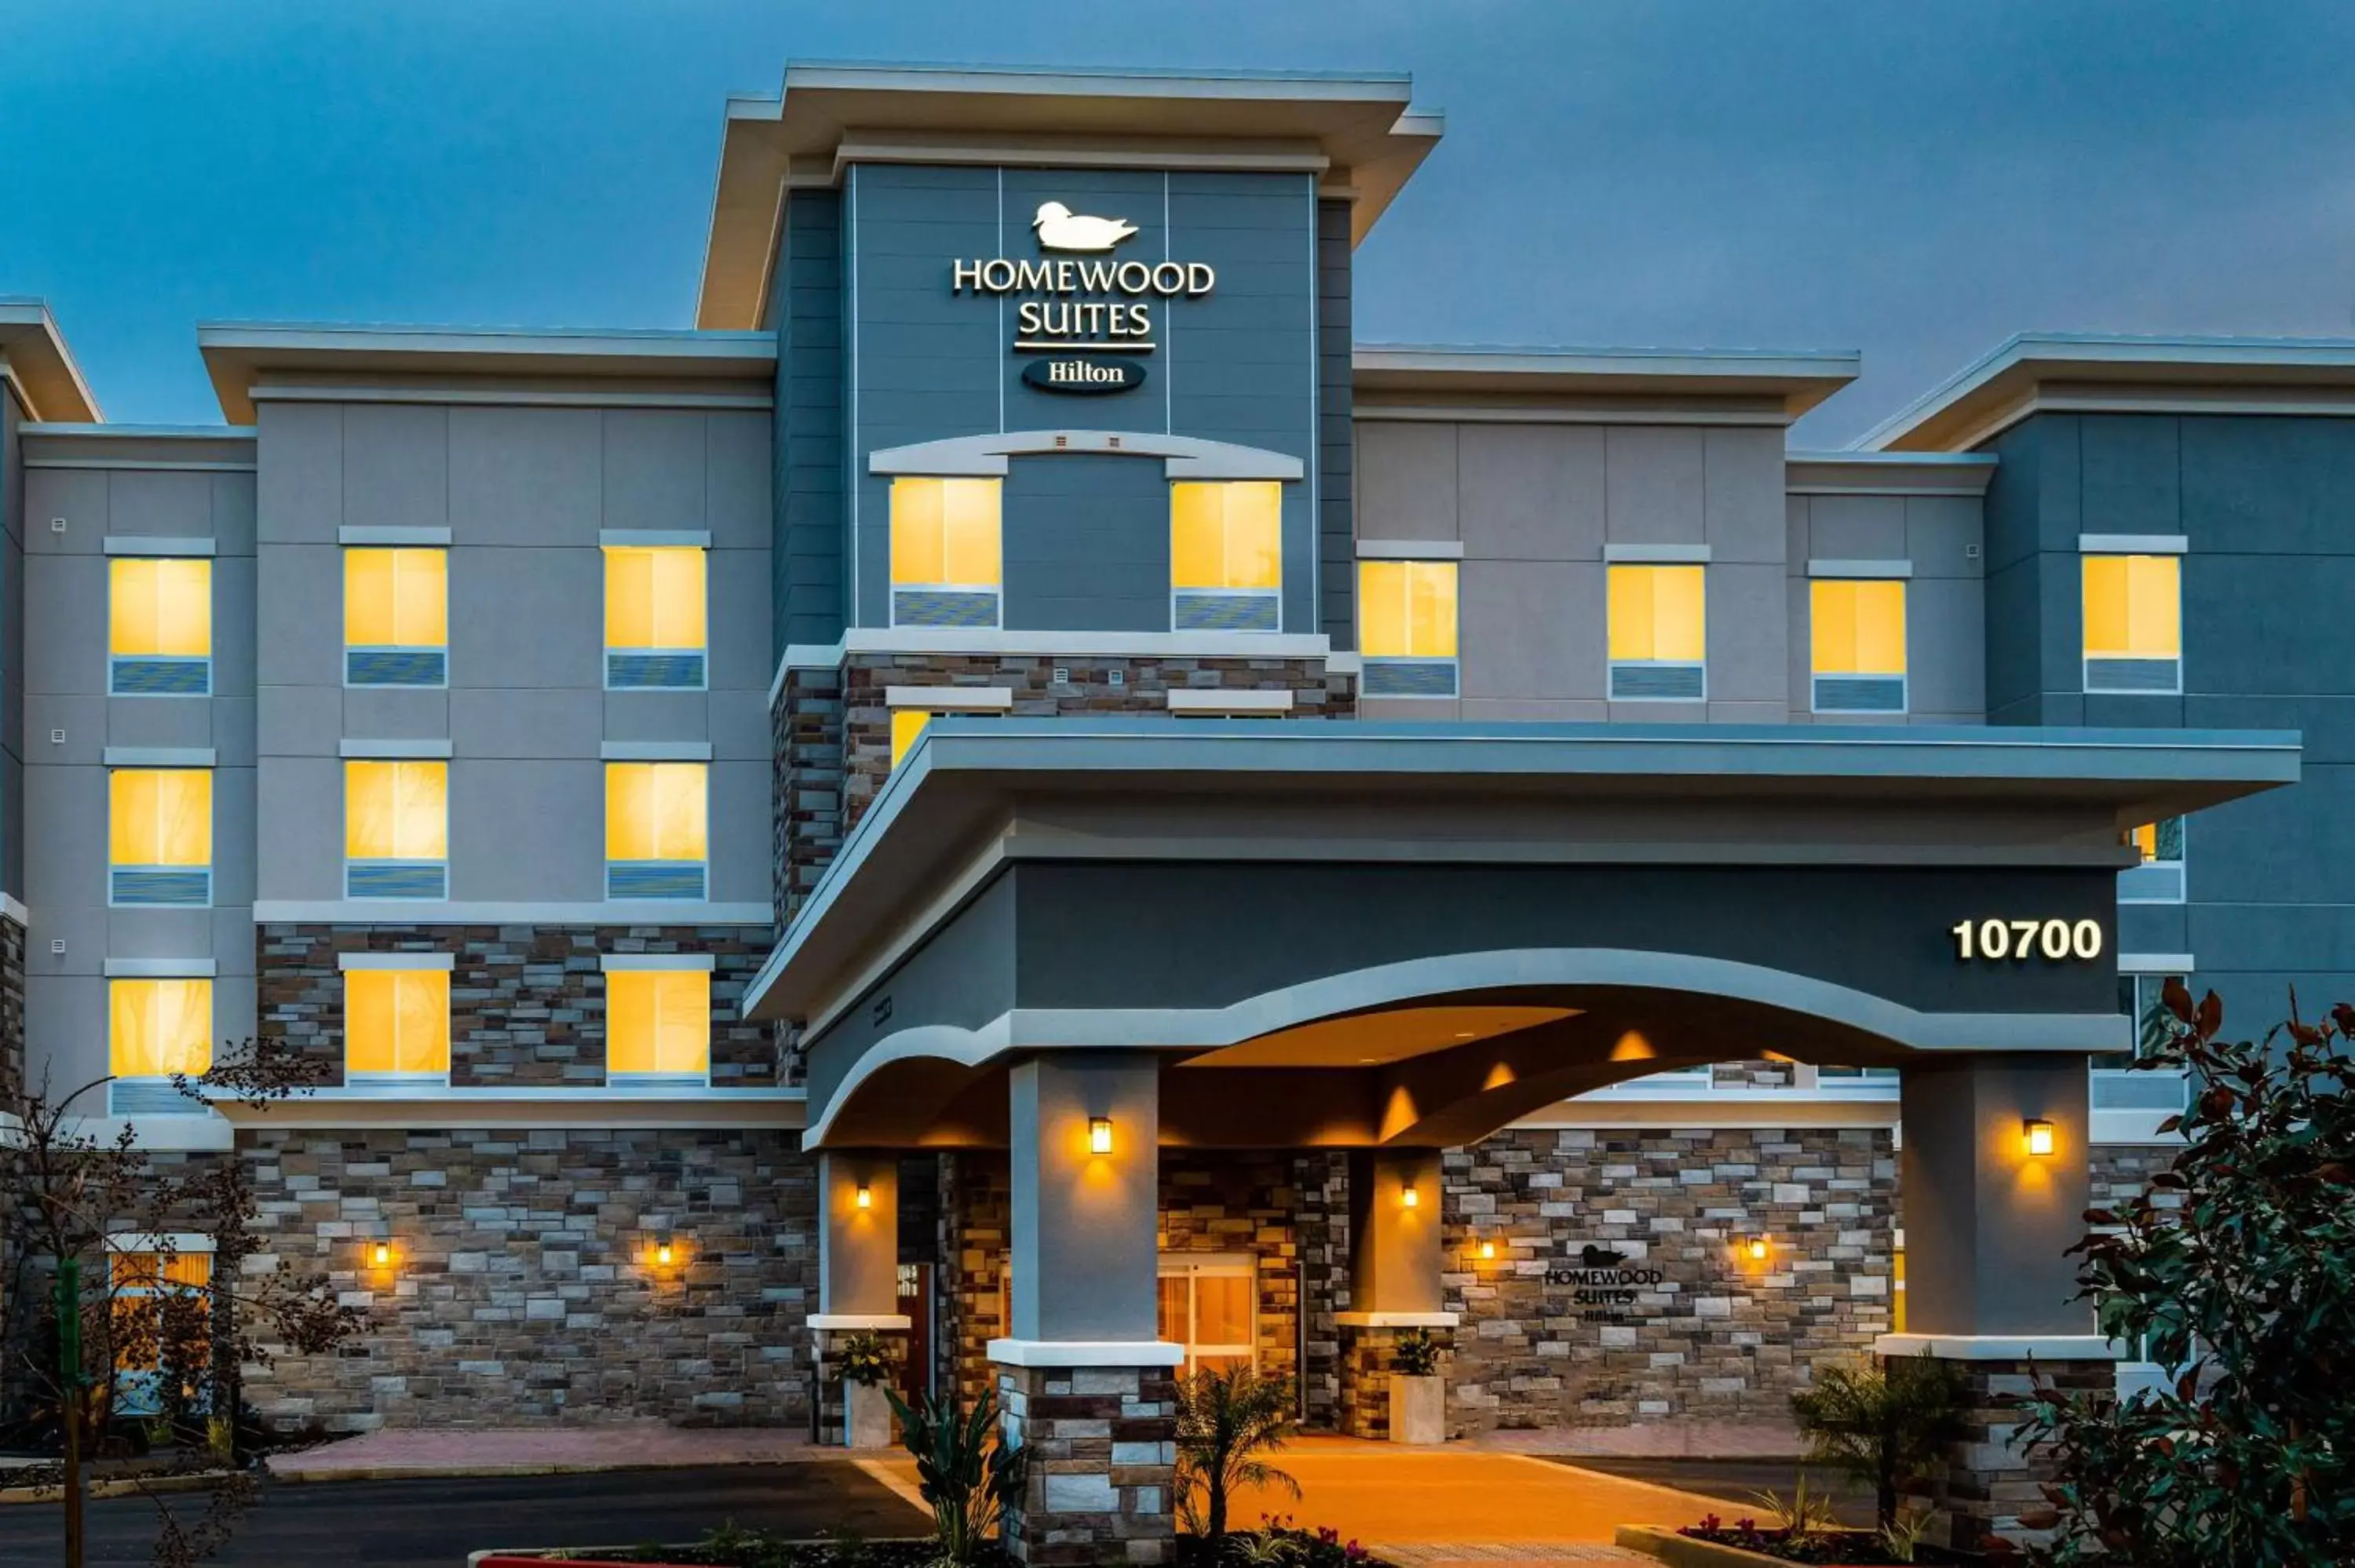 Property Building in Homewood Suites By Hilton Rancho Cordova, Ca